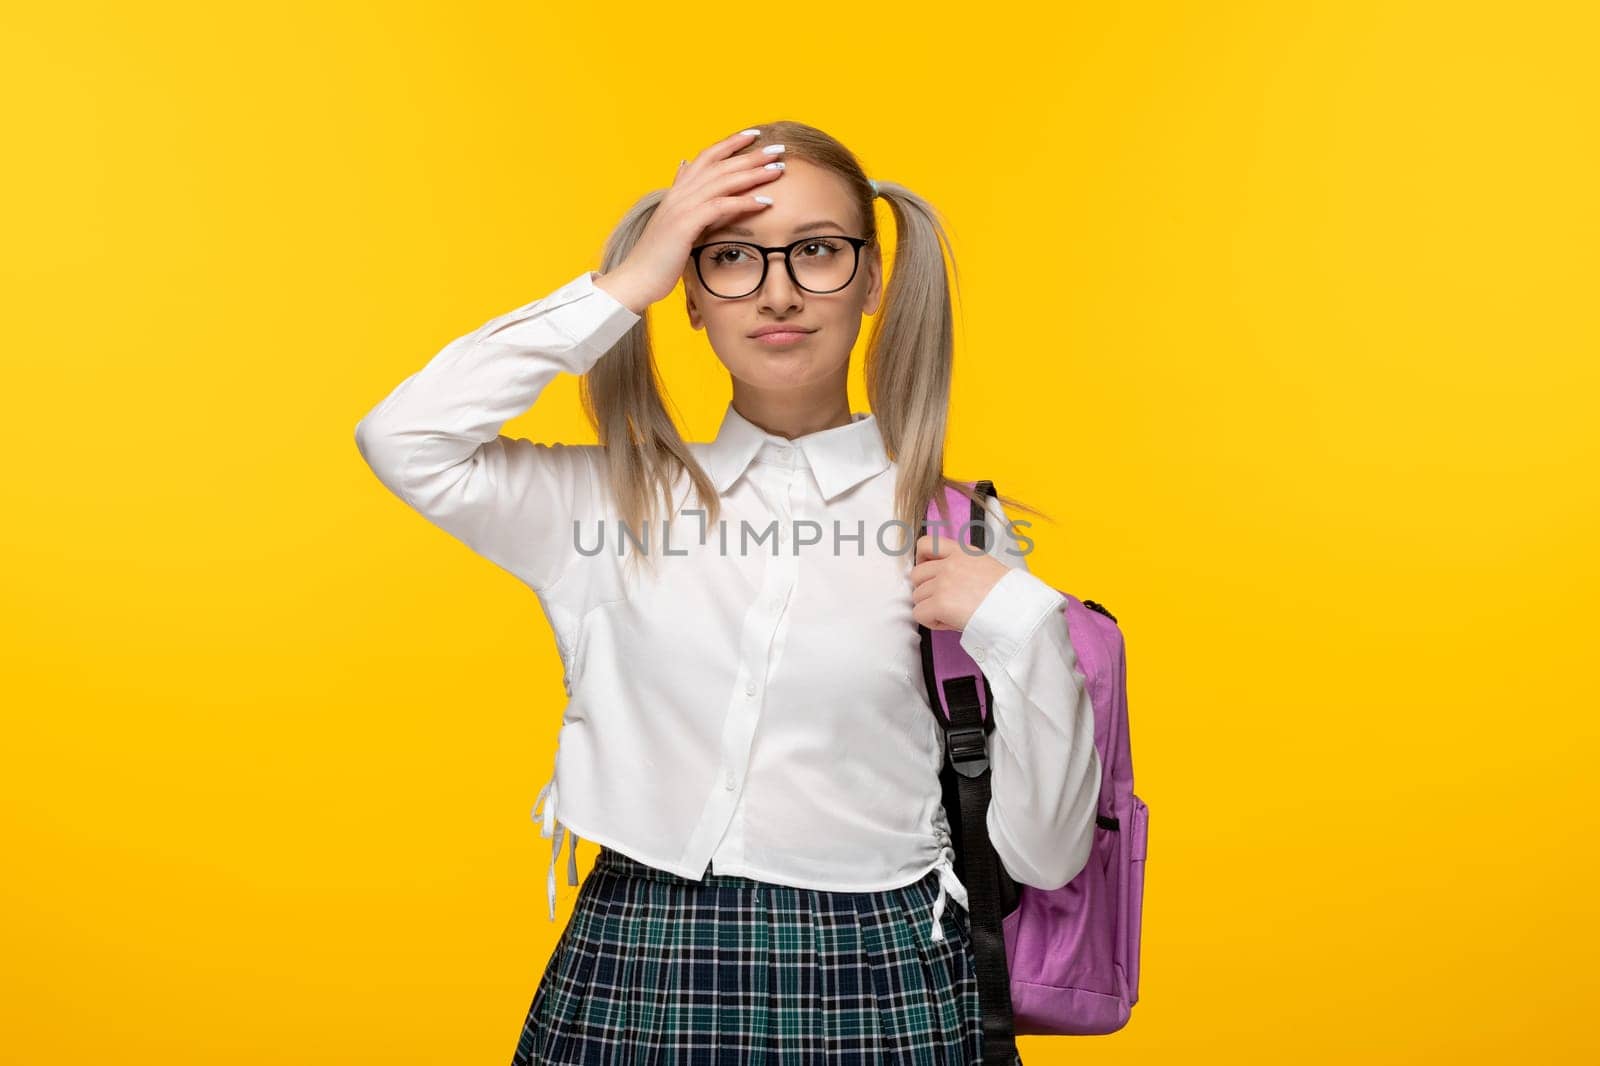 world book day blonde girl touching forehead with backpack on yellow background by Kamran